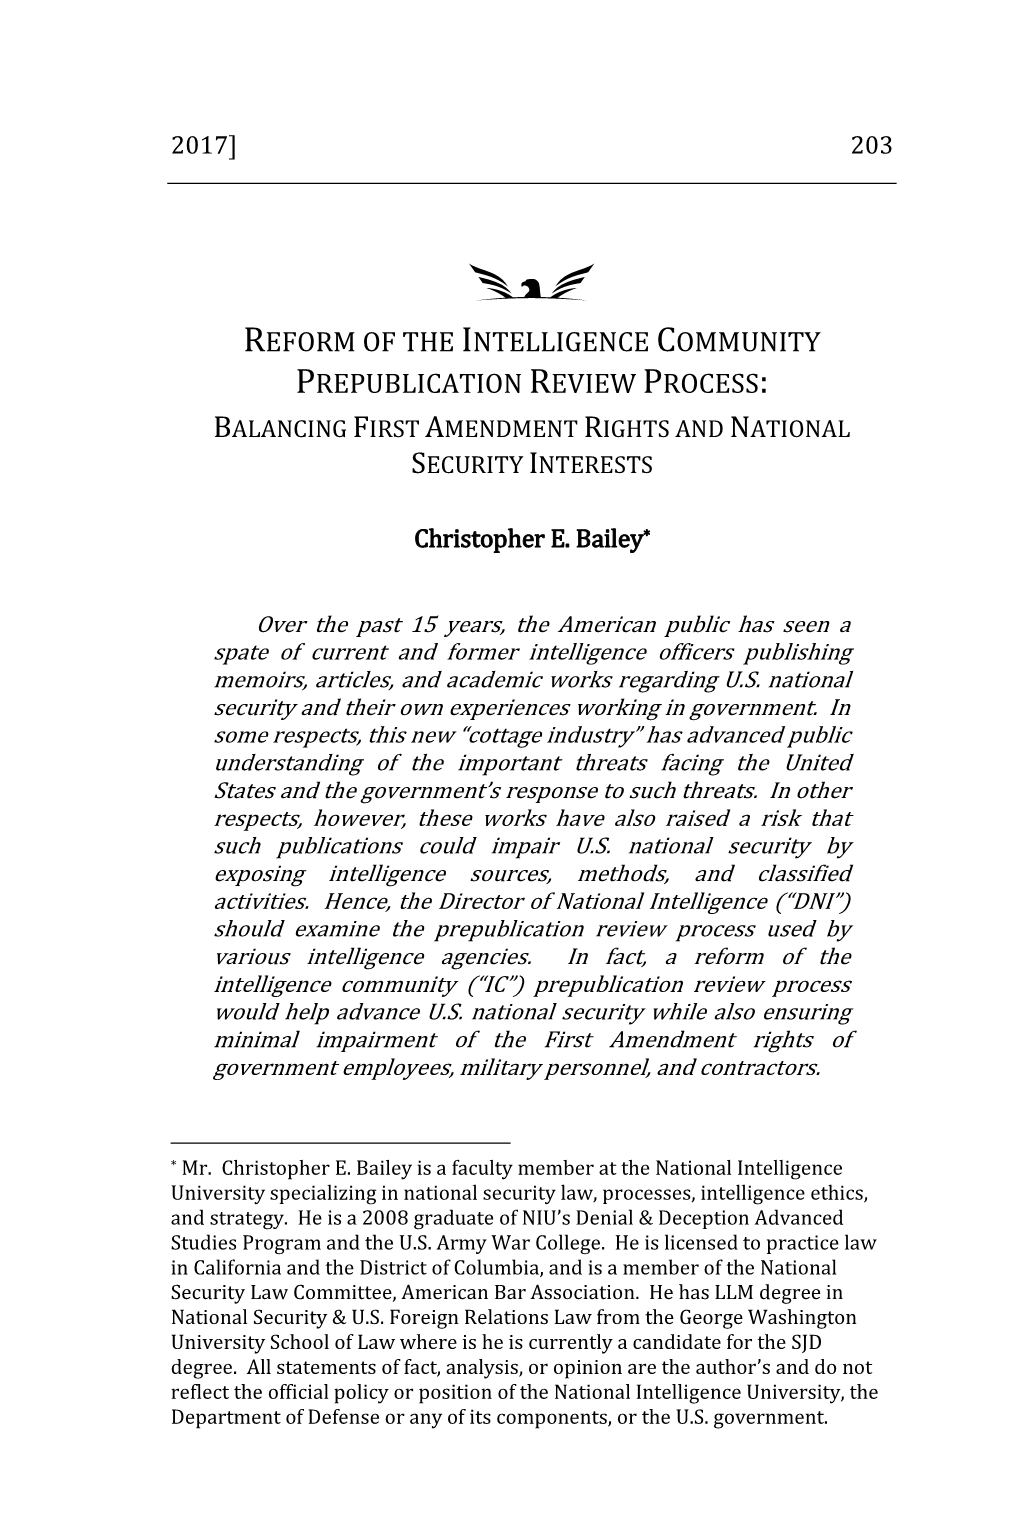 Reform of the Intelligence Community Publication Review Process